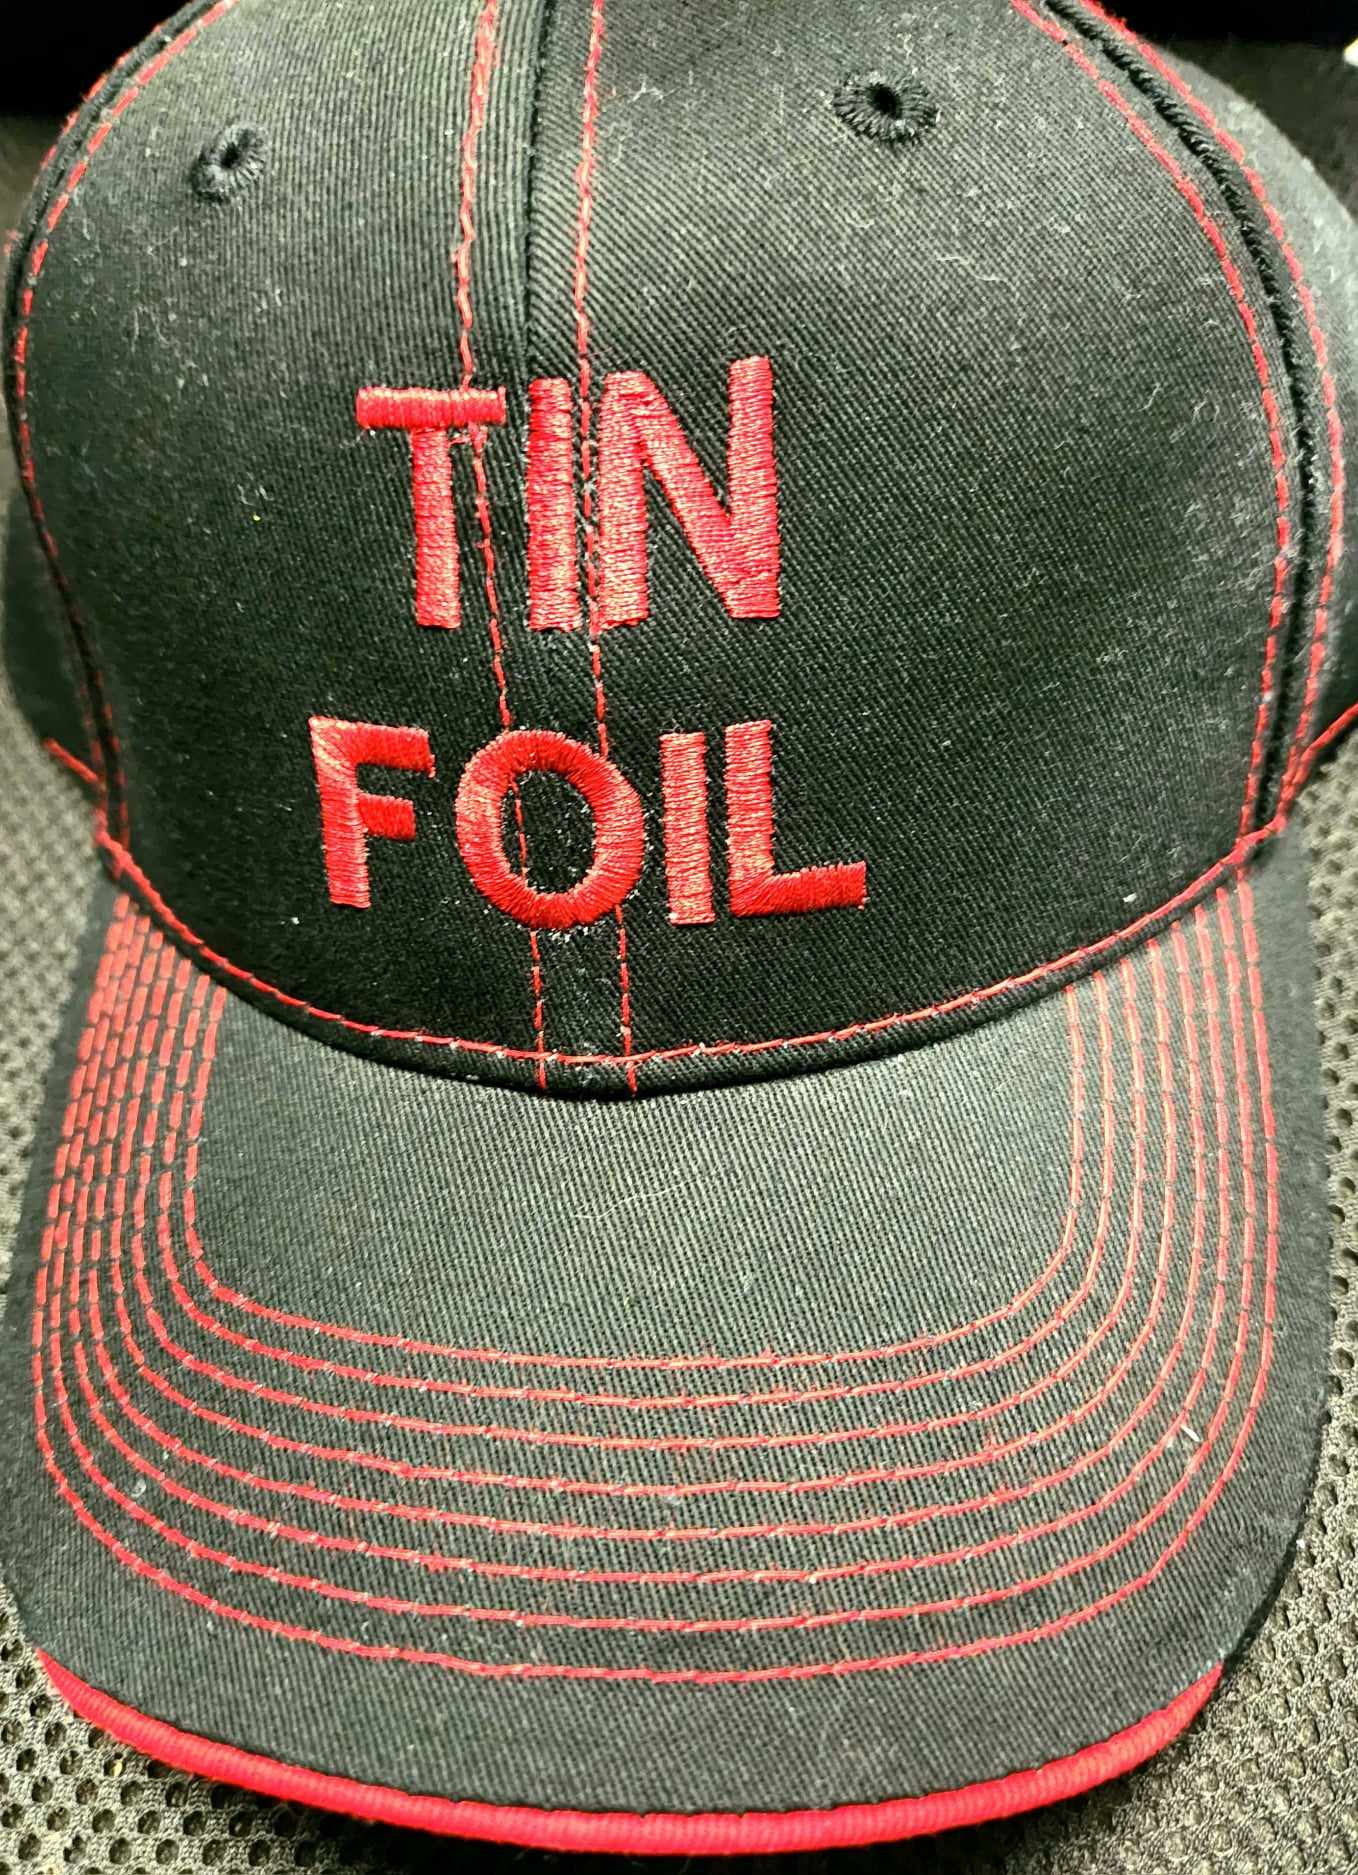 Hats with Tin Foil Letter Embroidery